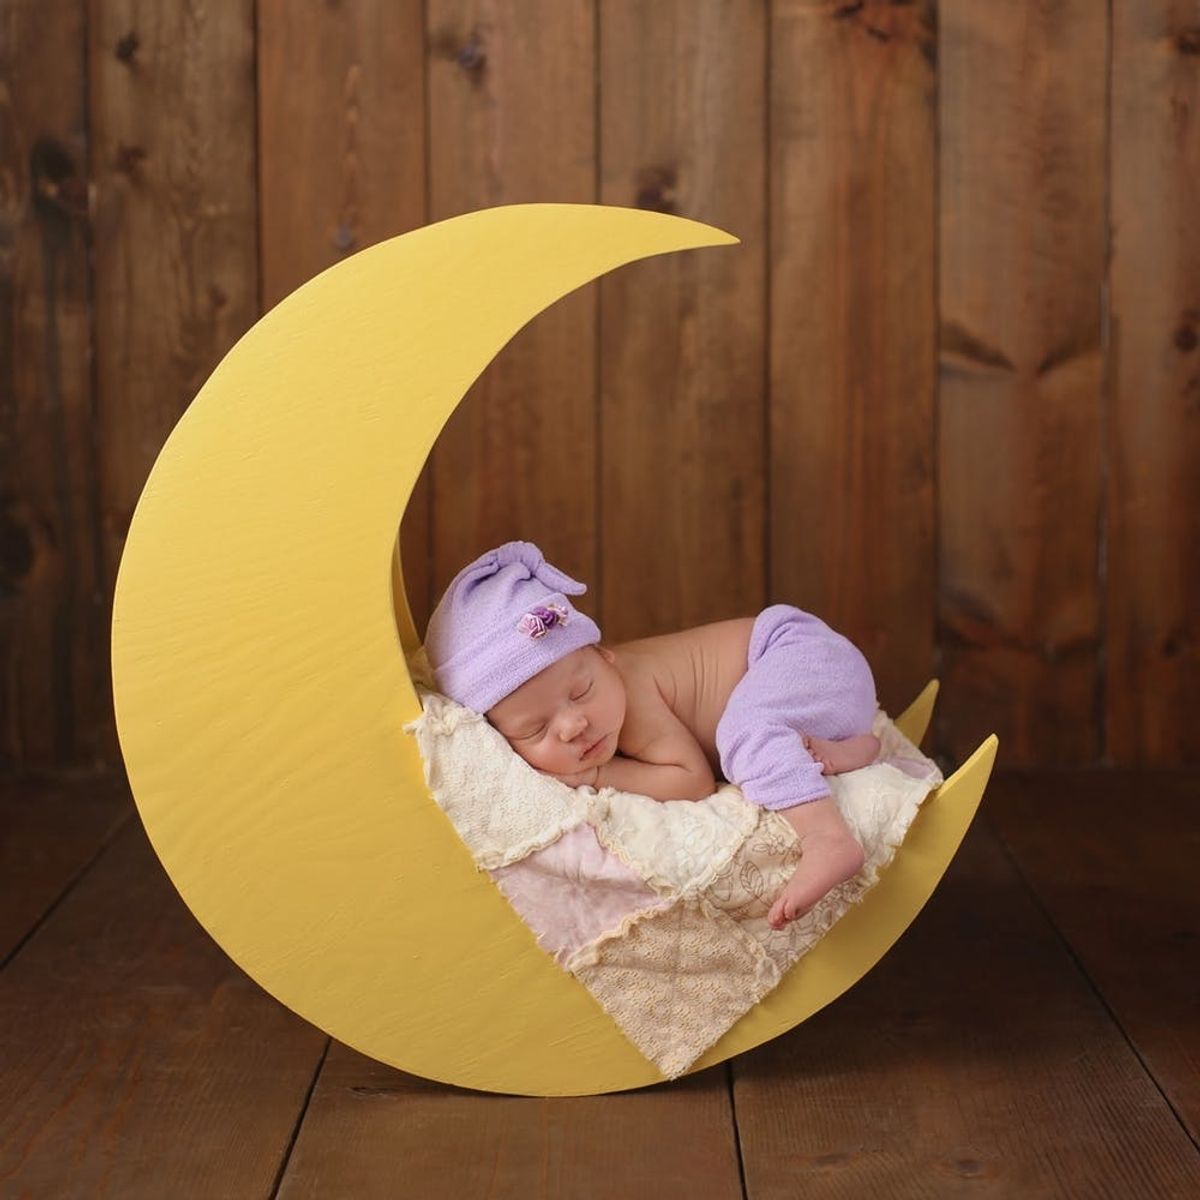 14 Moonstruck Baby Names to Celebrate the Lunar New Year